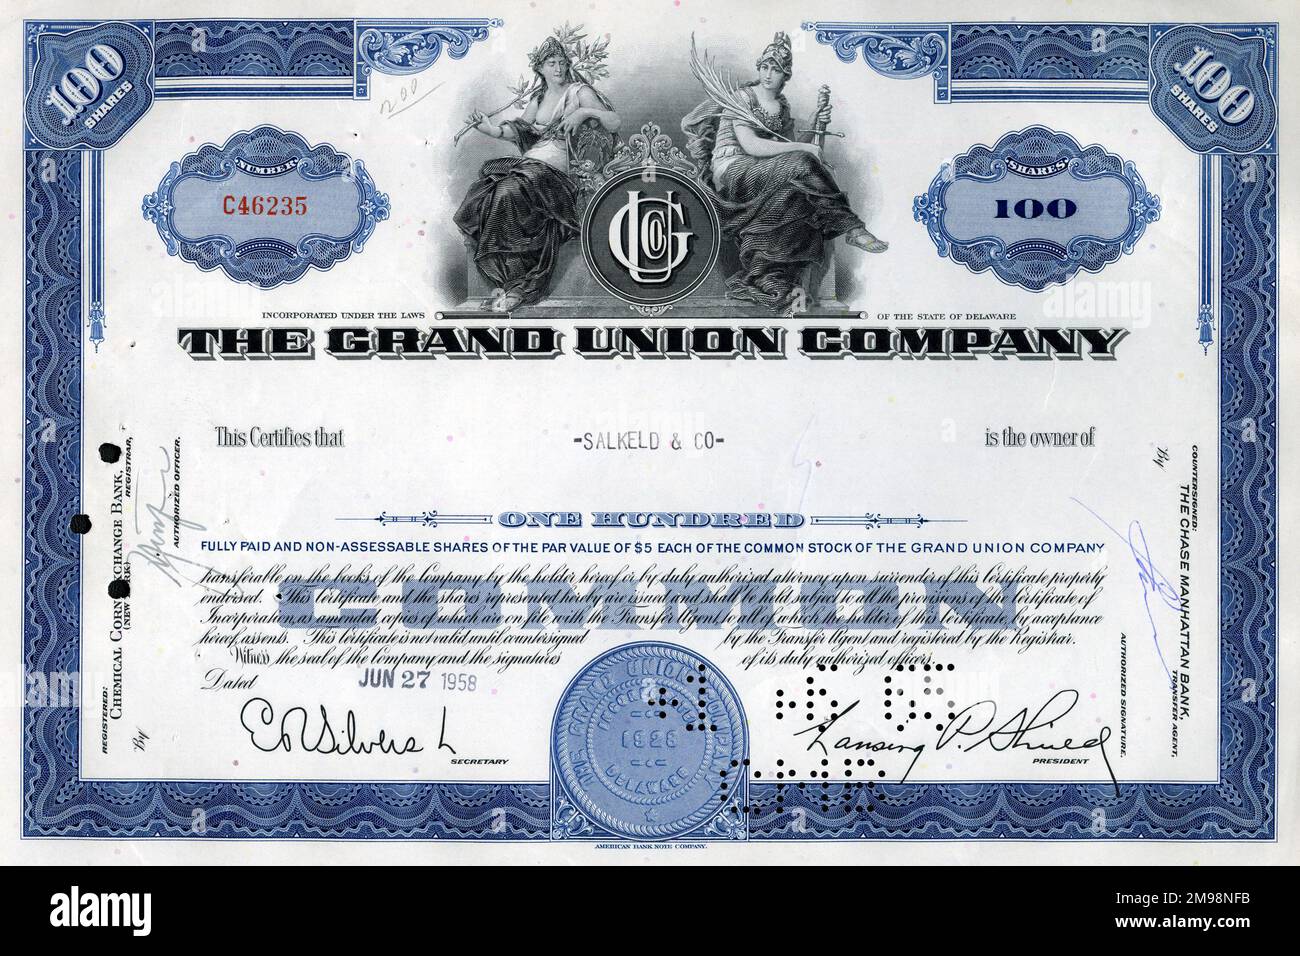 Stock Share Certificate - The Grand Union Company, 100 shares. Stock Photo